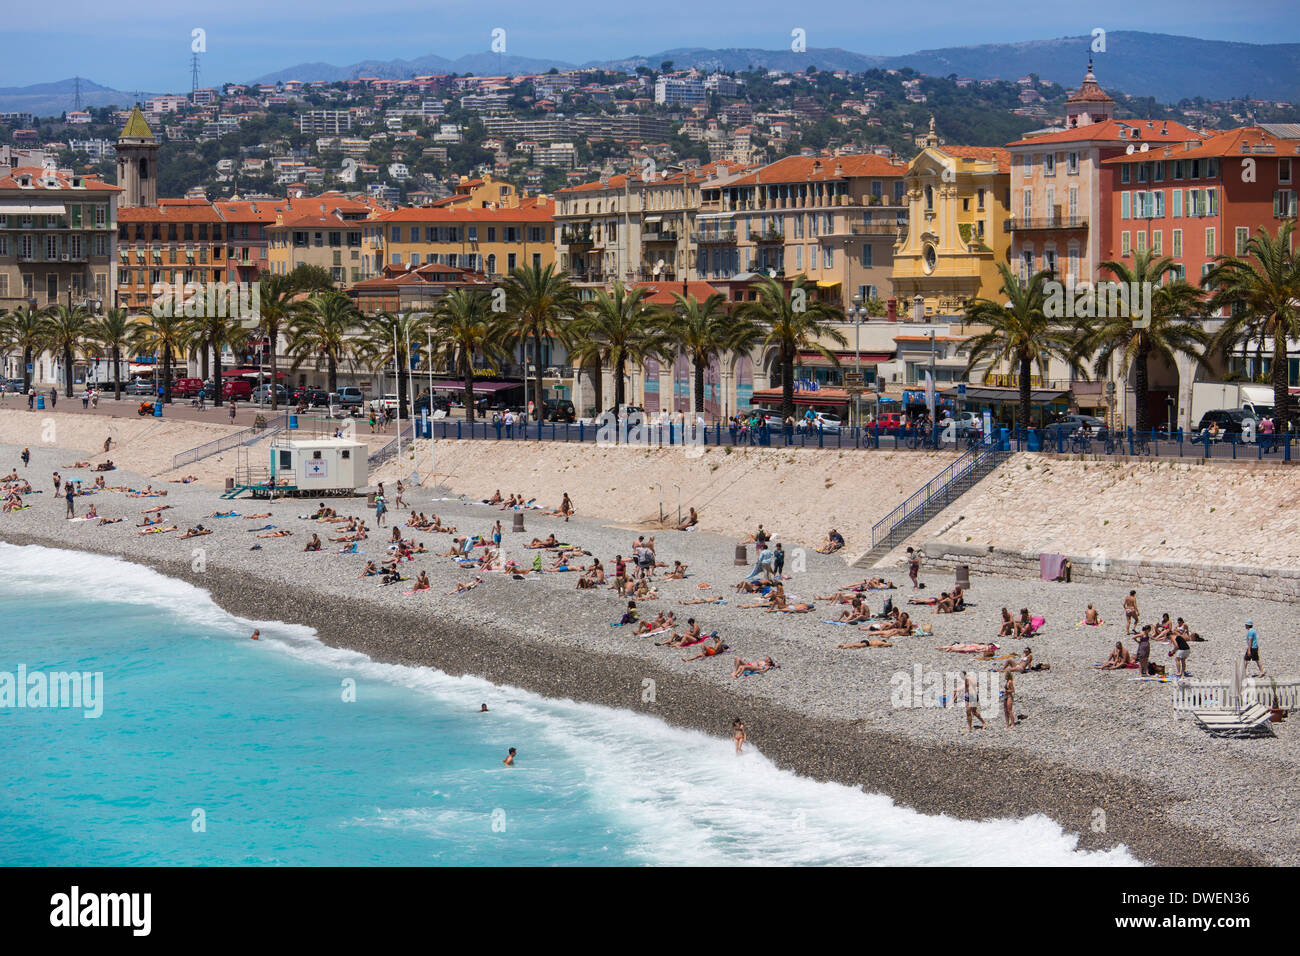 The main beach at the city of Nice on the Cote d'Azur in the South of France. Stock Photo